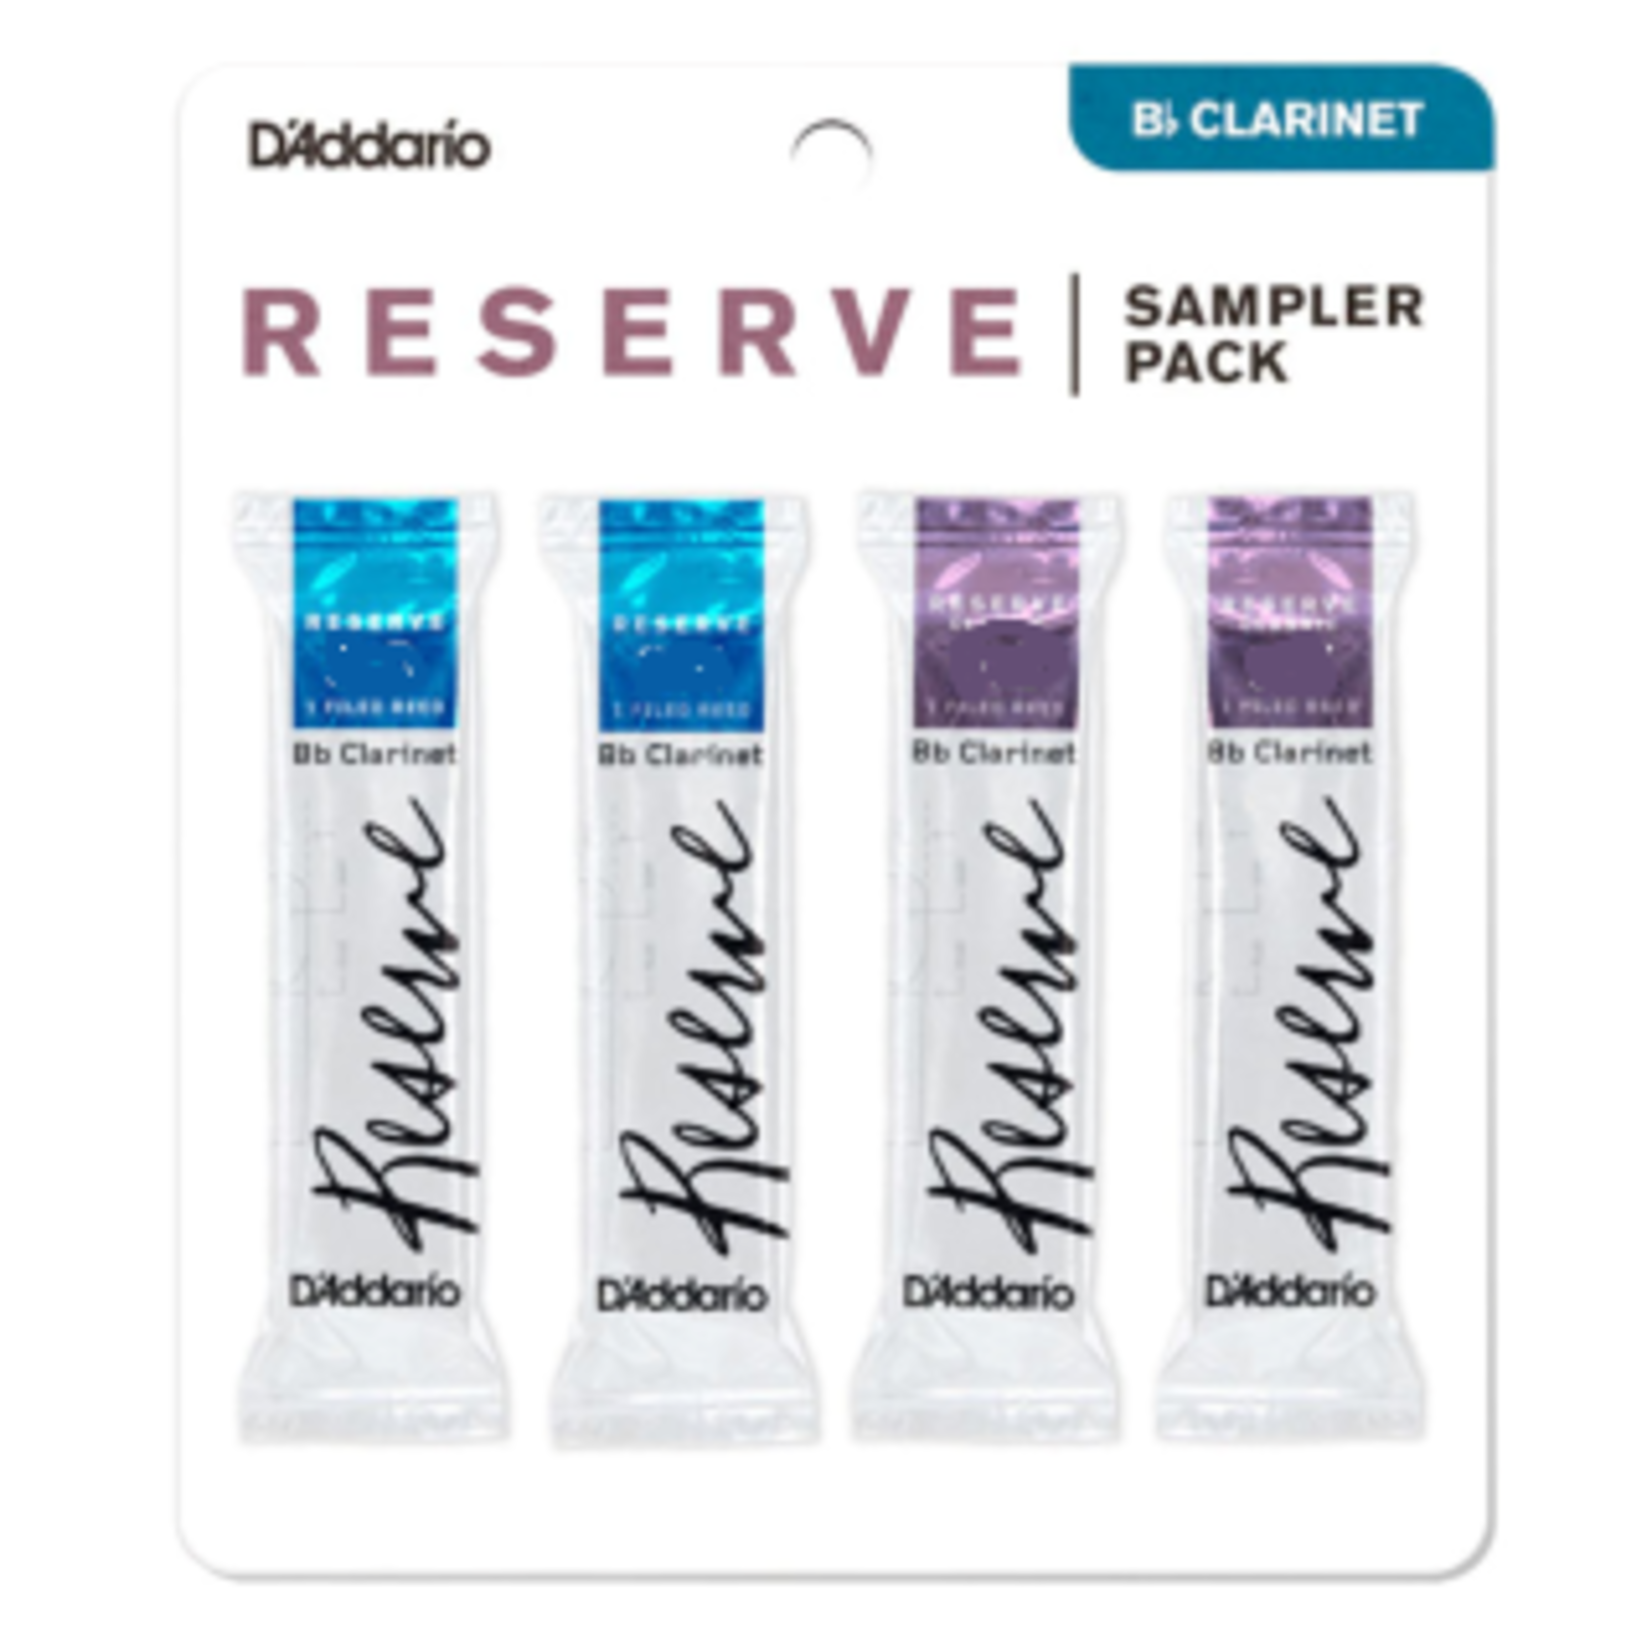 D'Addario Woodwinds DRS-C30 Bb Clarinet Reed Sampler Pack